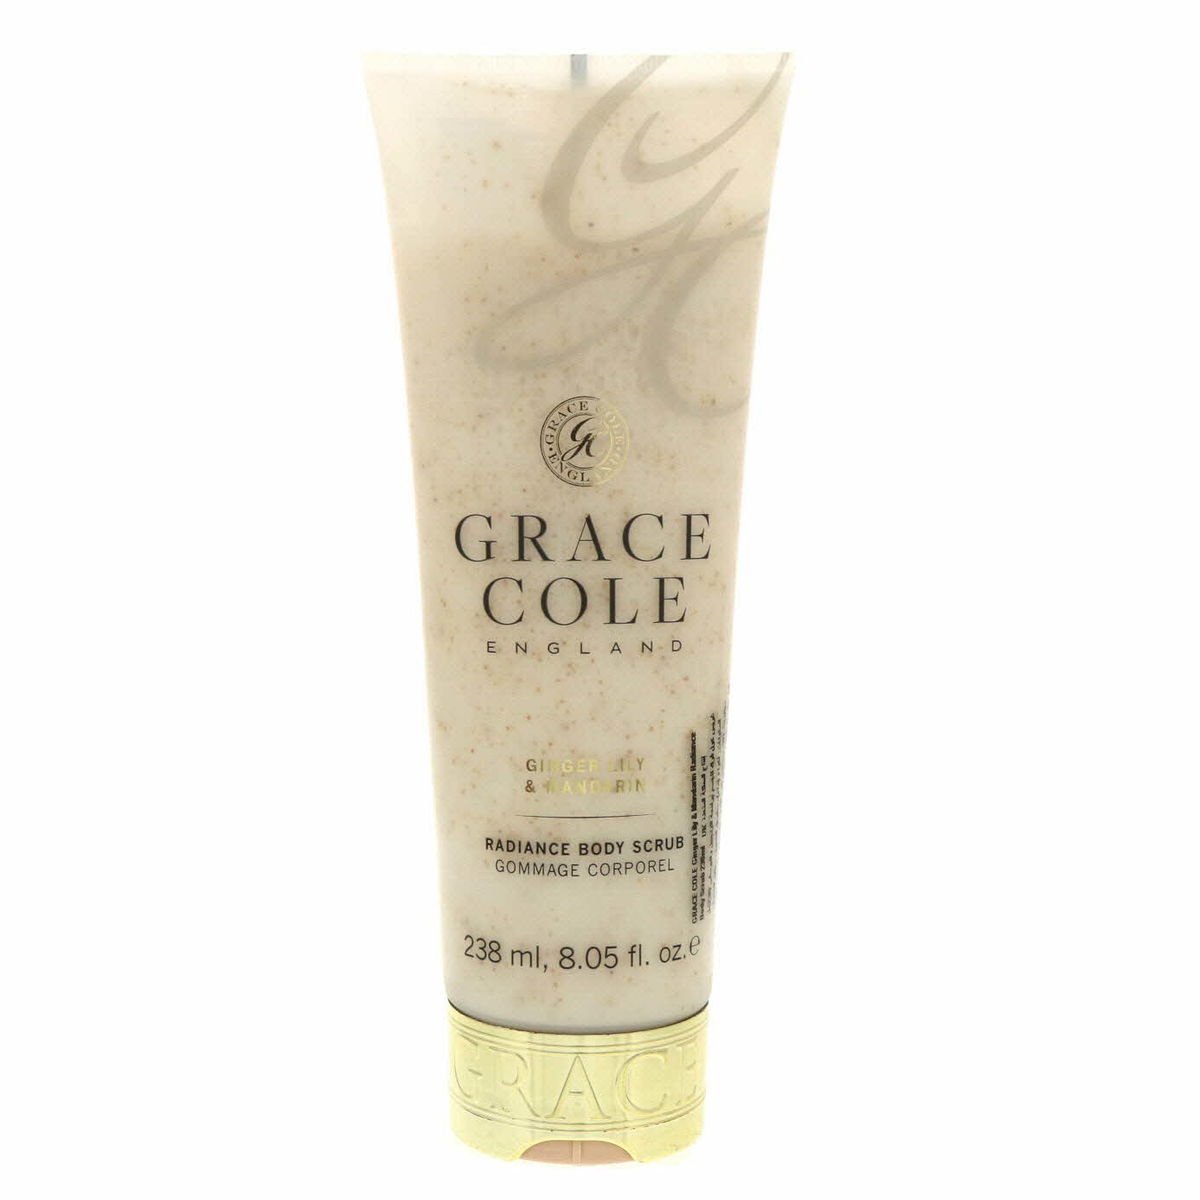 Grace Cole Radiance Body Scrub Ginger Lily And Mandarian 238ml